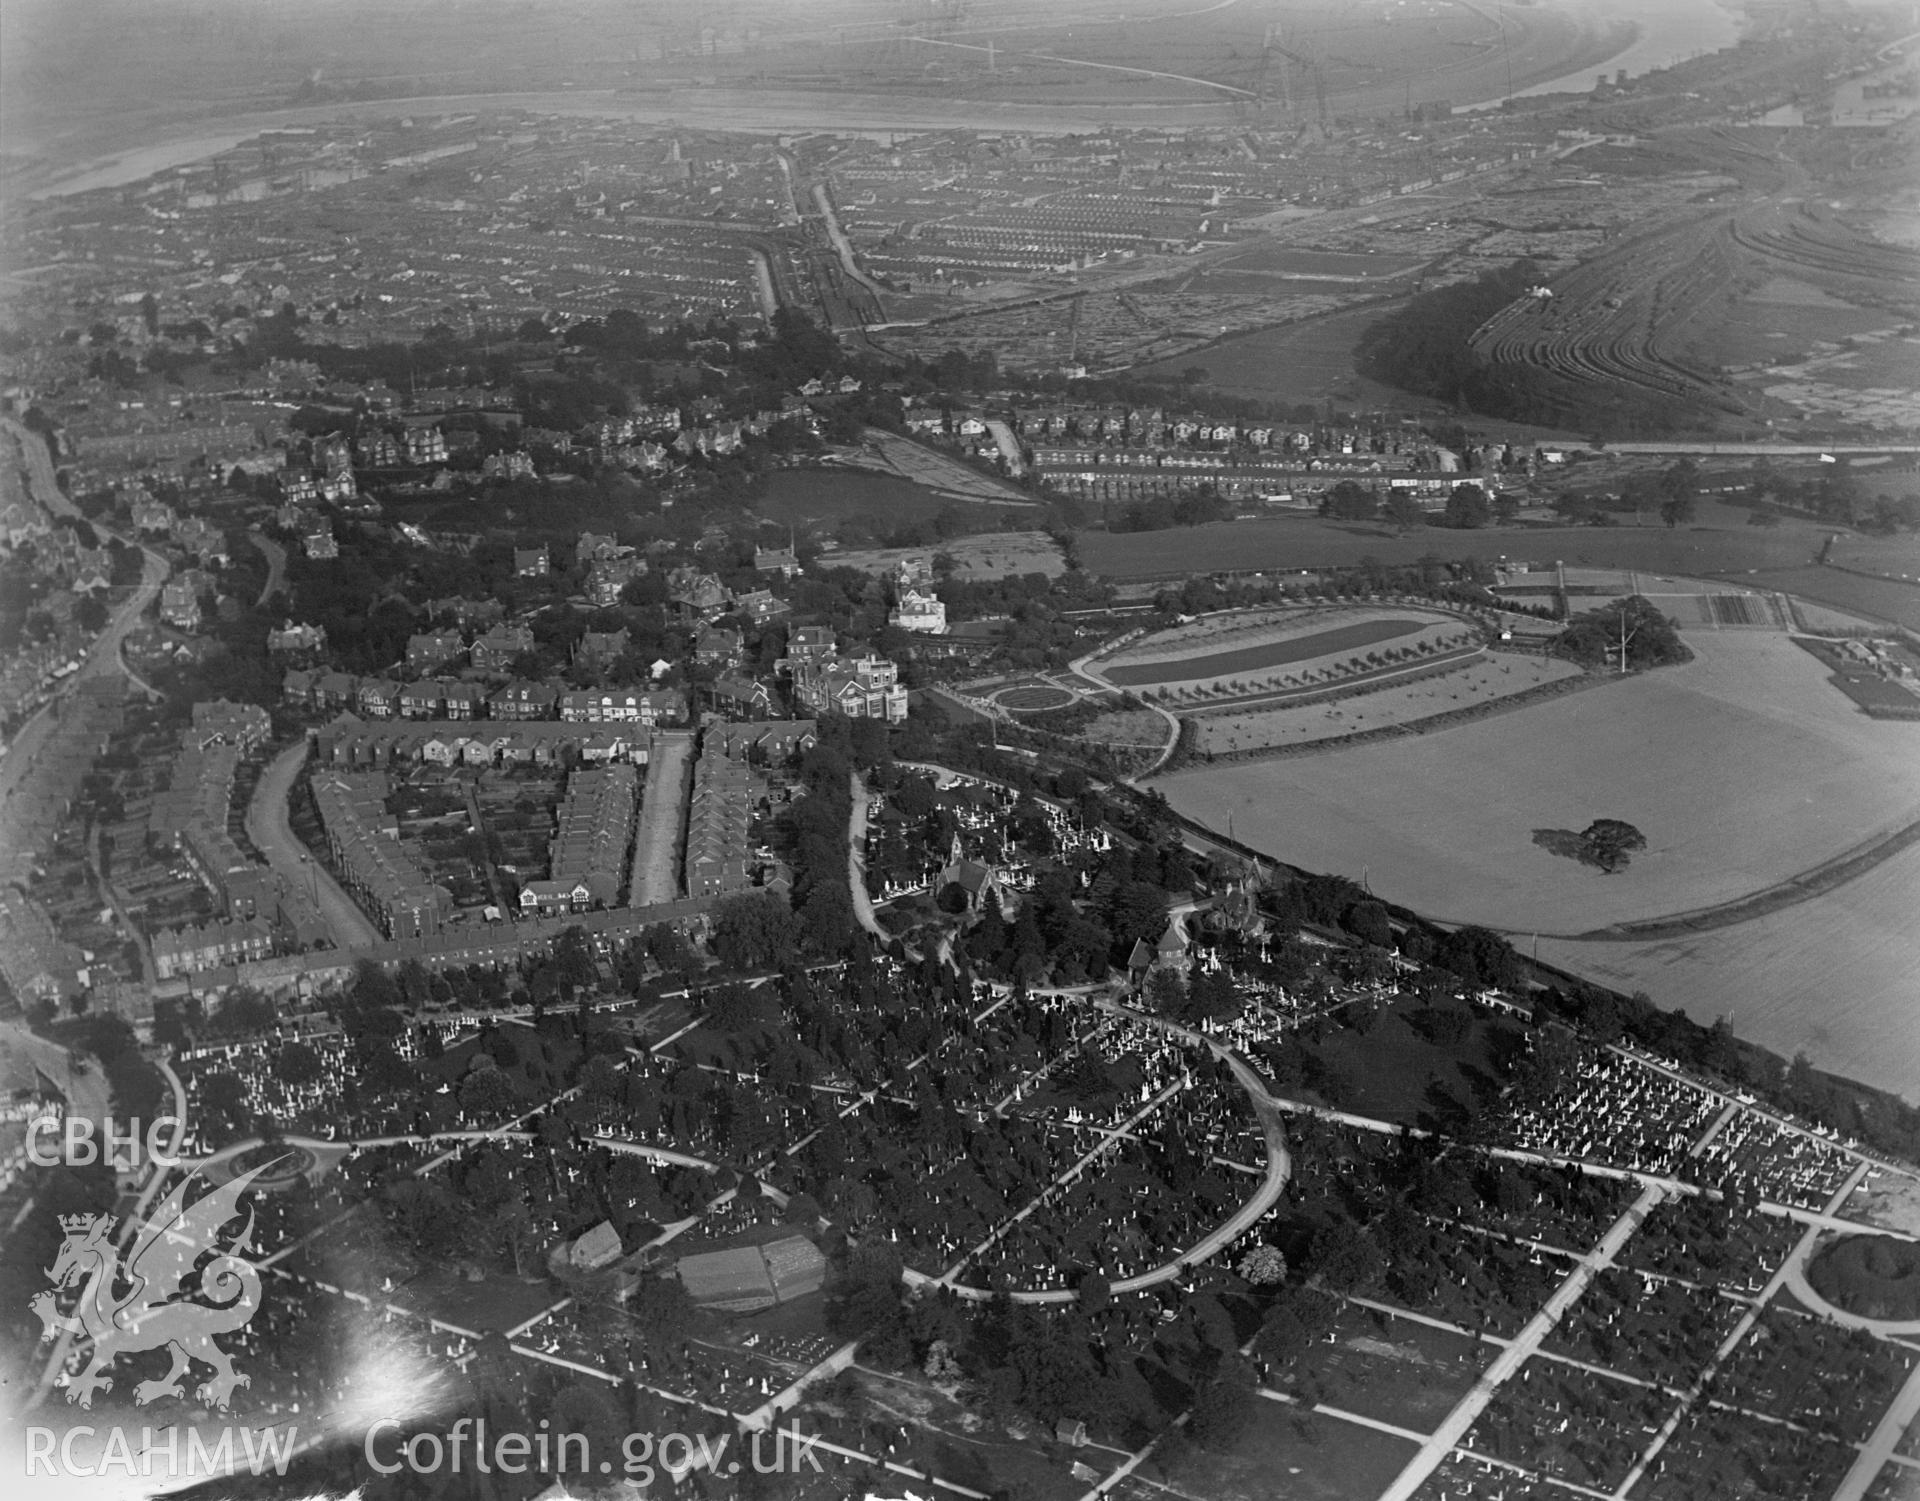 General view of Newport showing St Woolos Cemetery, oblique aerial view. 5?x4? black and white glass plate negative.